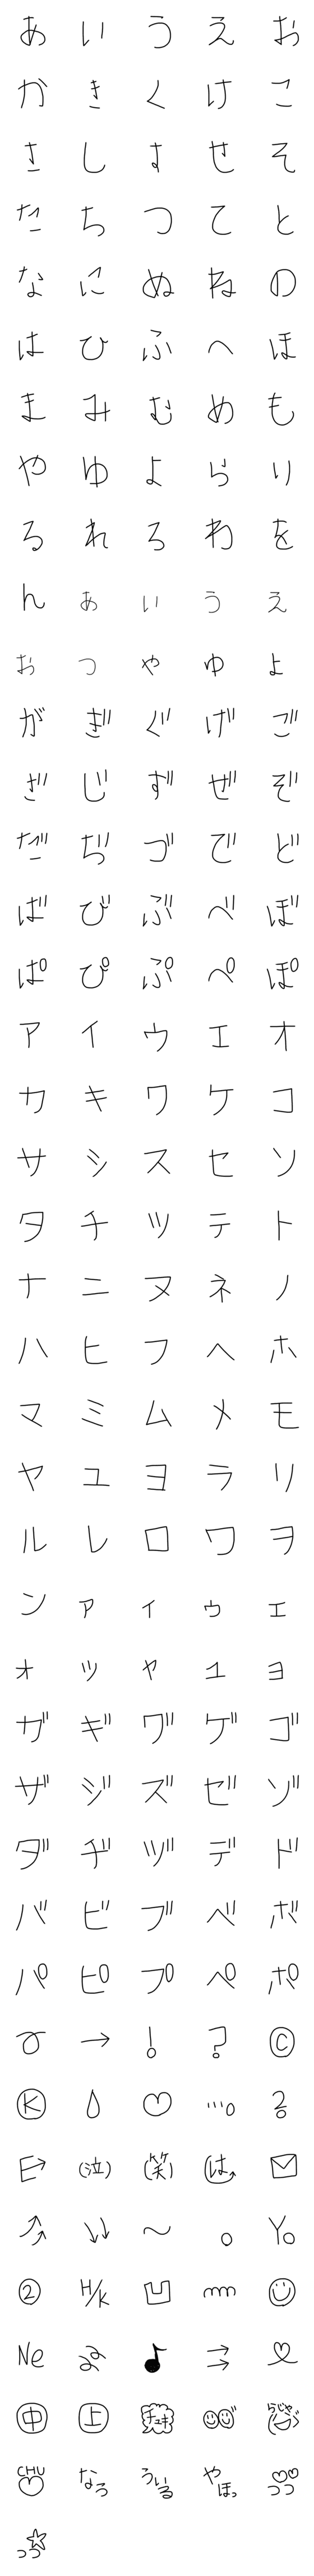 [LINE絵文字]あの時代の女子文字の画像一覧